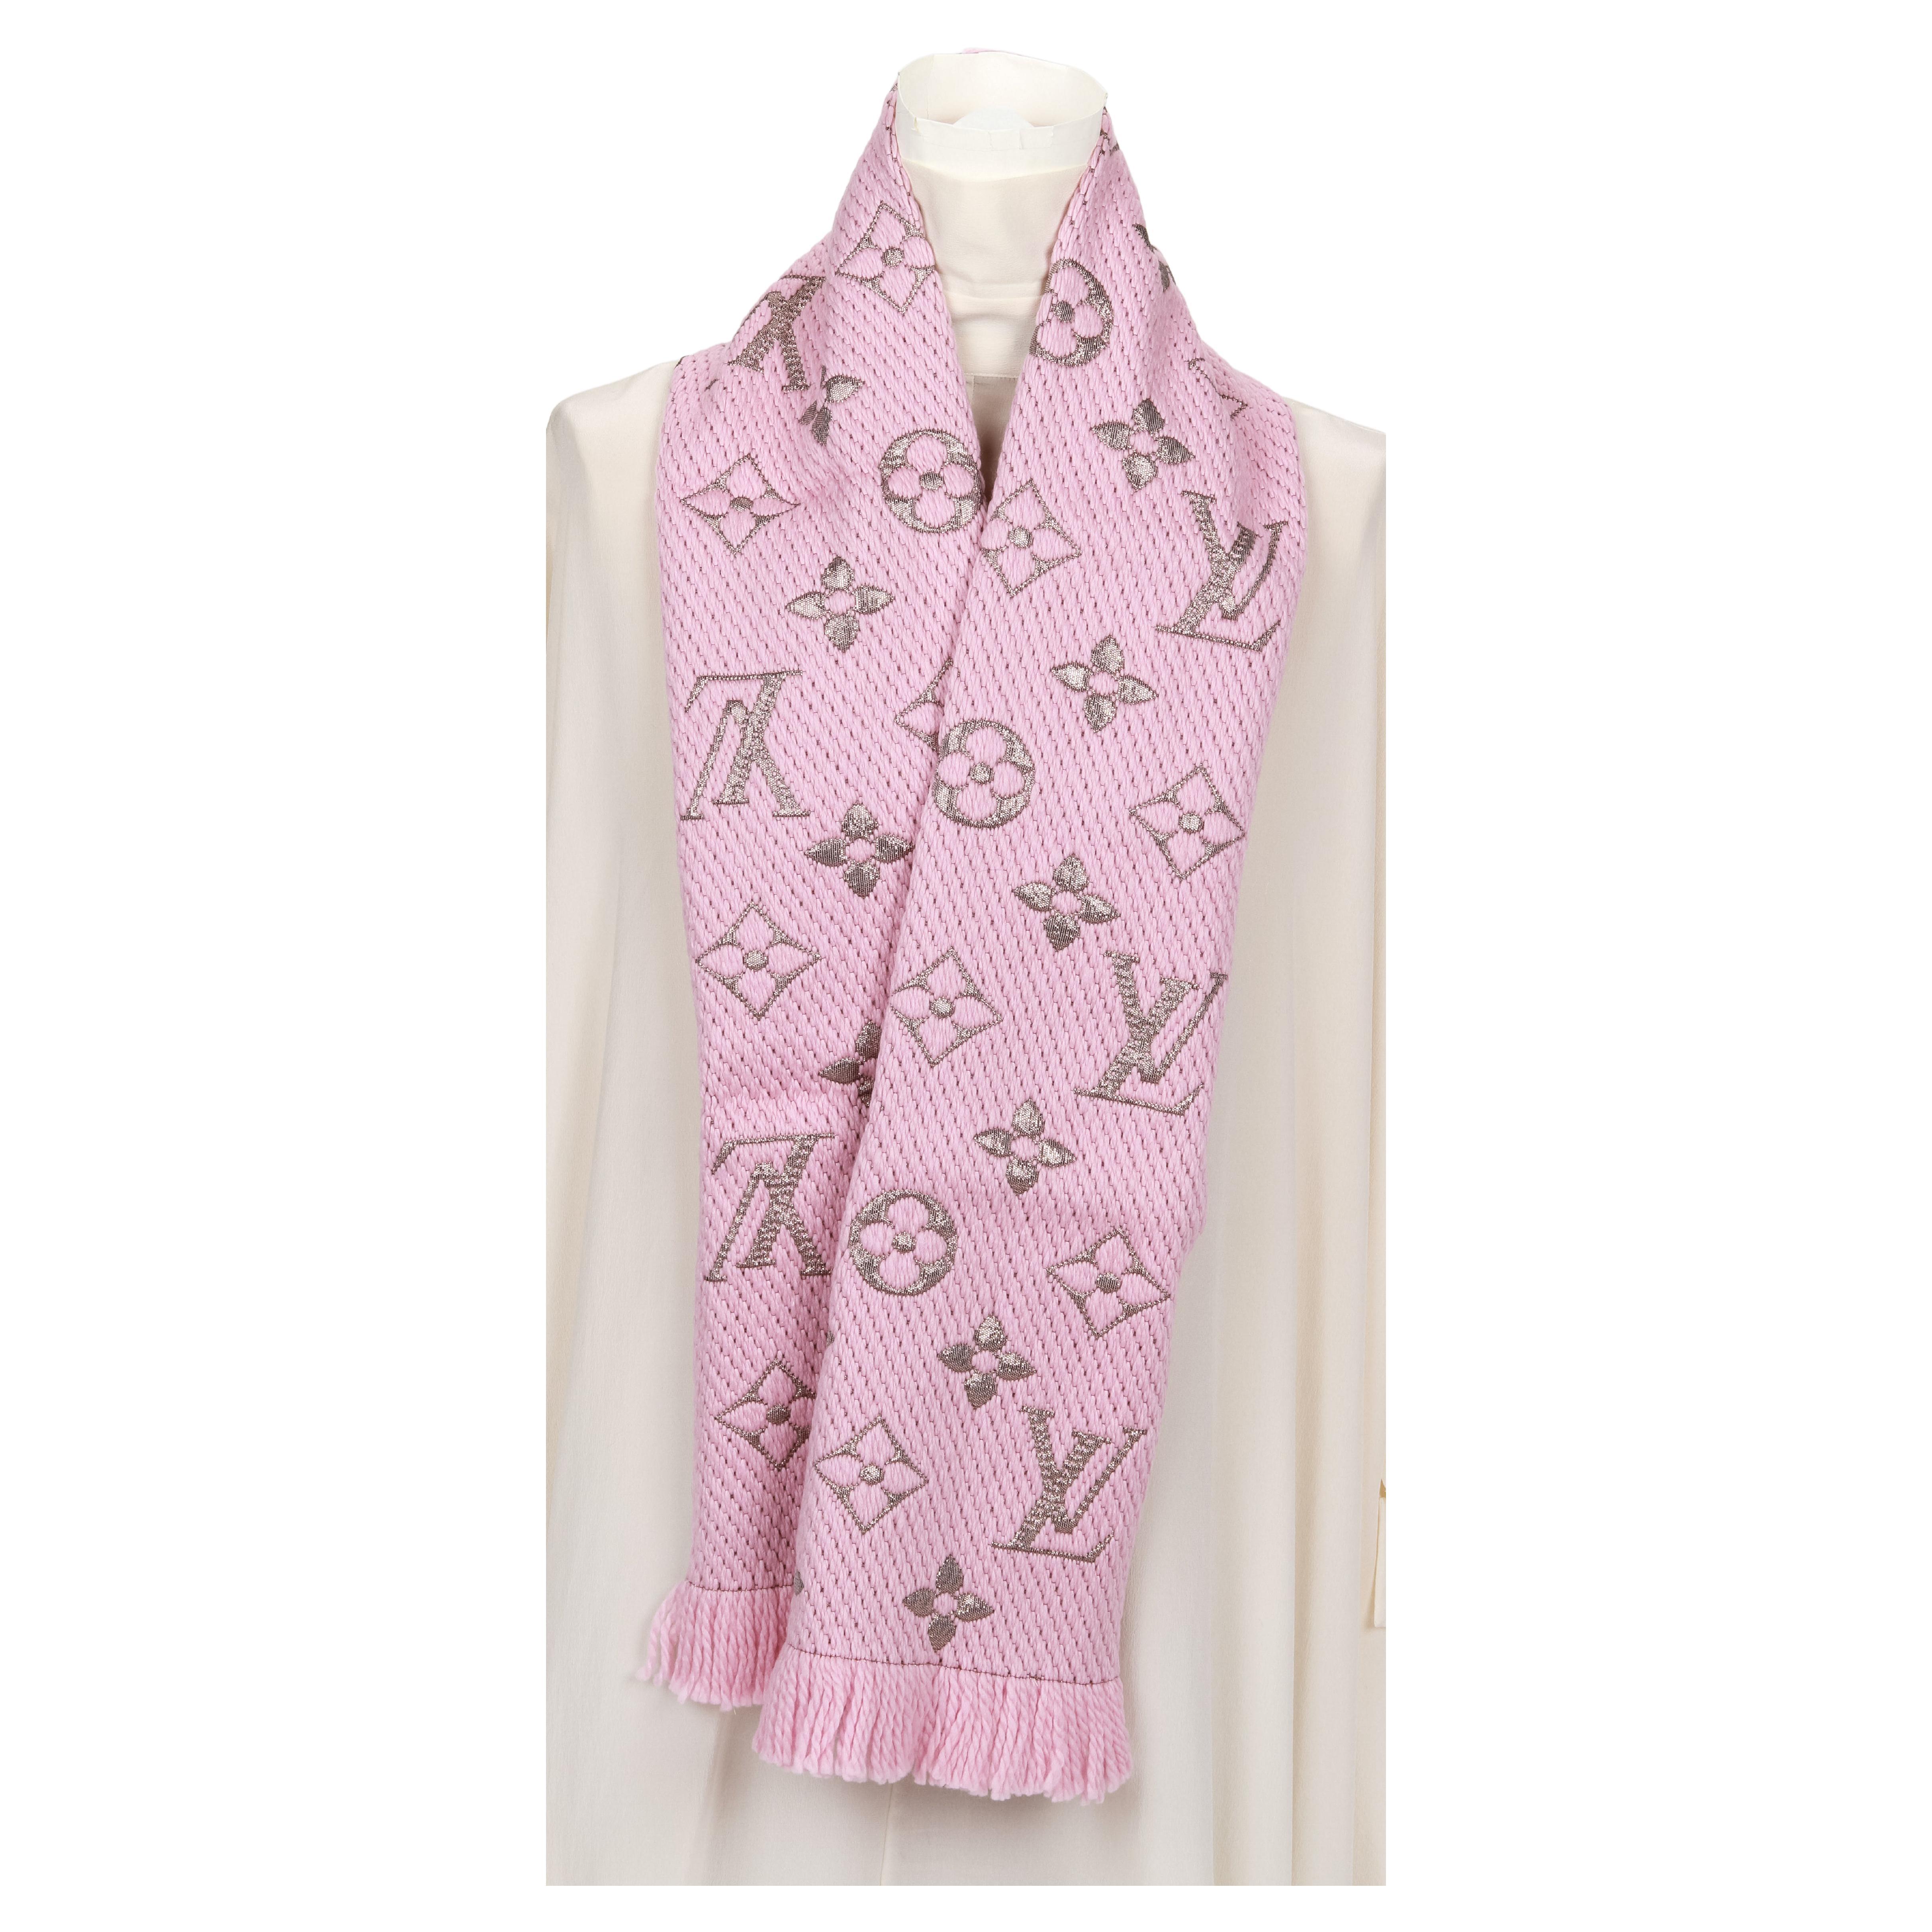 Louis Vuitton LOUIS VUITTON Carre All The Straps M76653 Scarf 100% Silk  Rose Pink